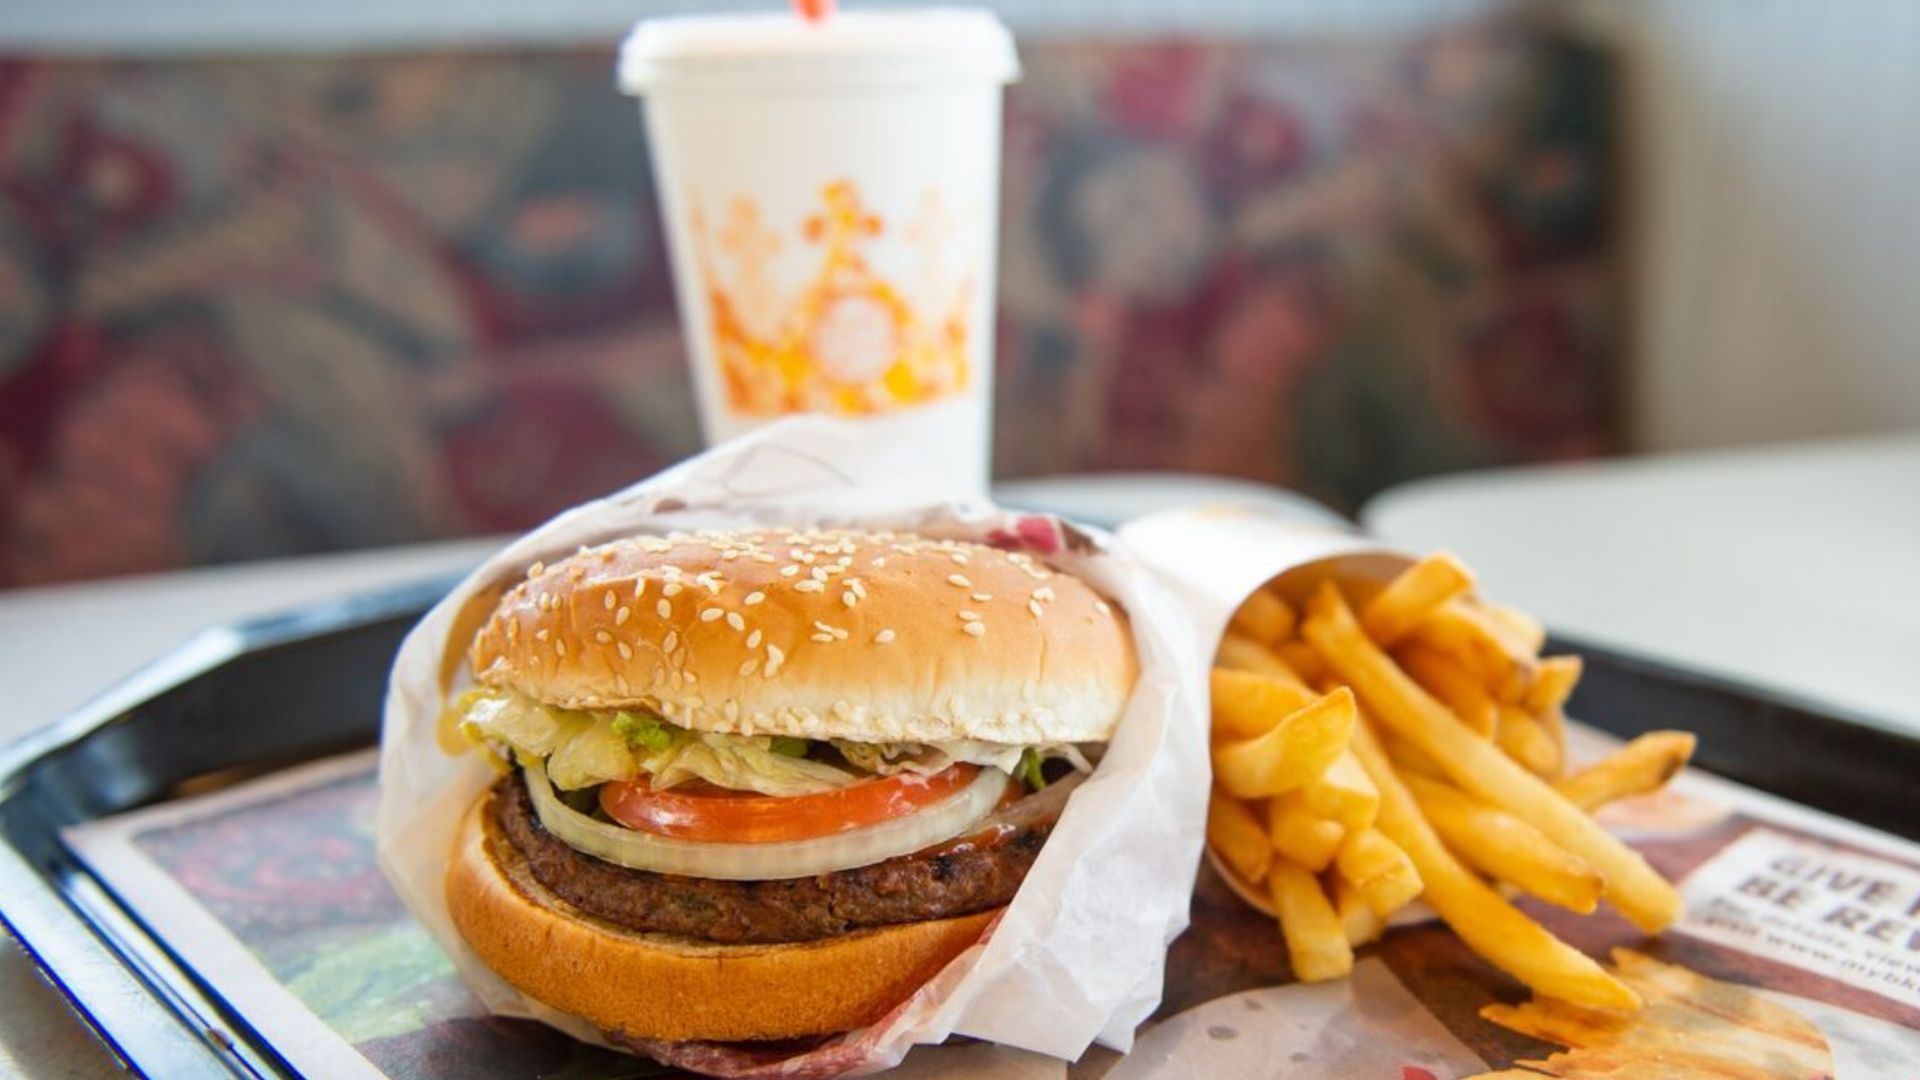 Burger King to Launch $5 Value Meal to Hit Back at McDonald’s